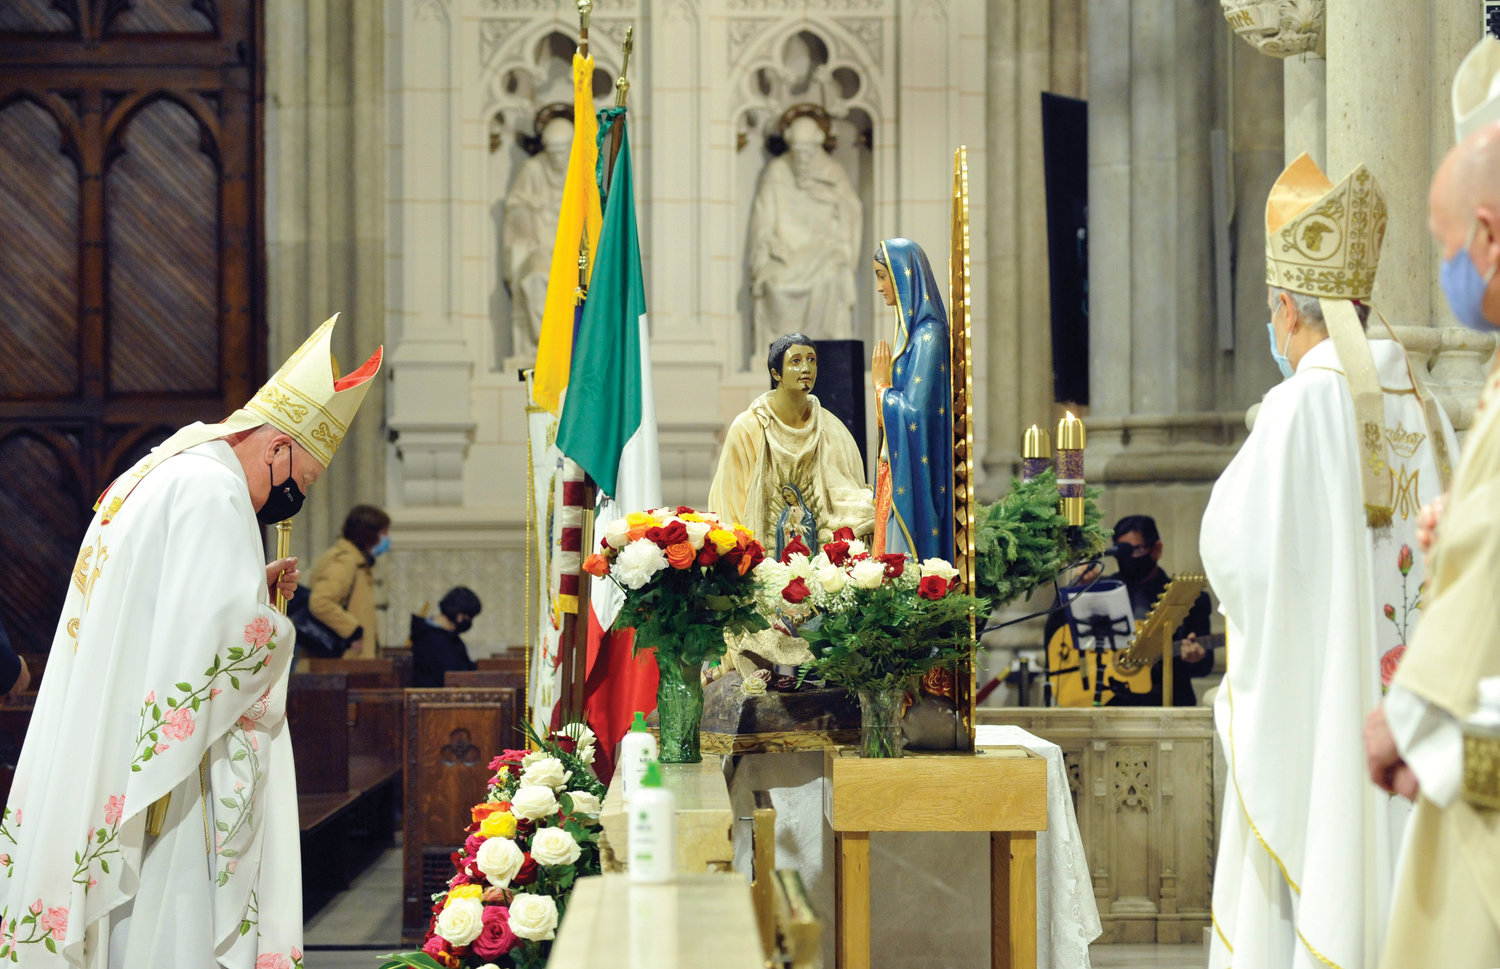 Cardinal Dolan prays at a statue of Our Lady of Guadalupe Dec. 12 before the annual feast-day Mass for the patroness of the Americas at St. Patrick’s Cathedral. At right is Archbishop Gabriele Caccia, Vatican nuncio to the United Nations, who served as a concelebrant.